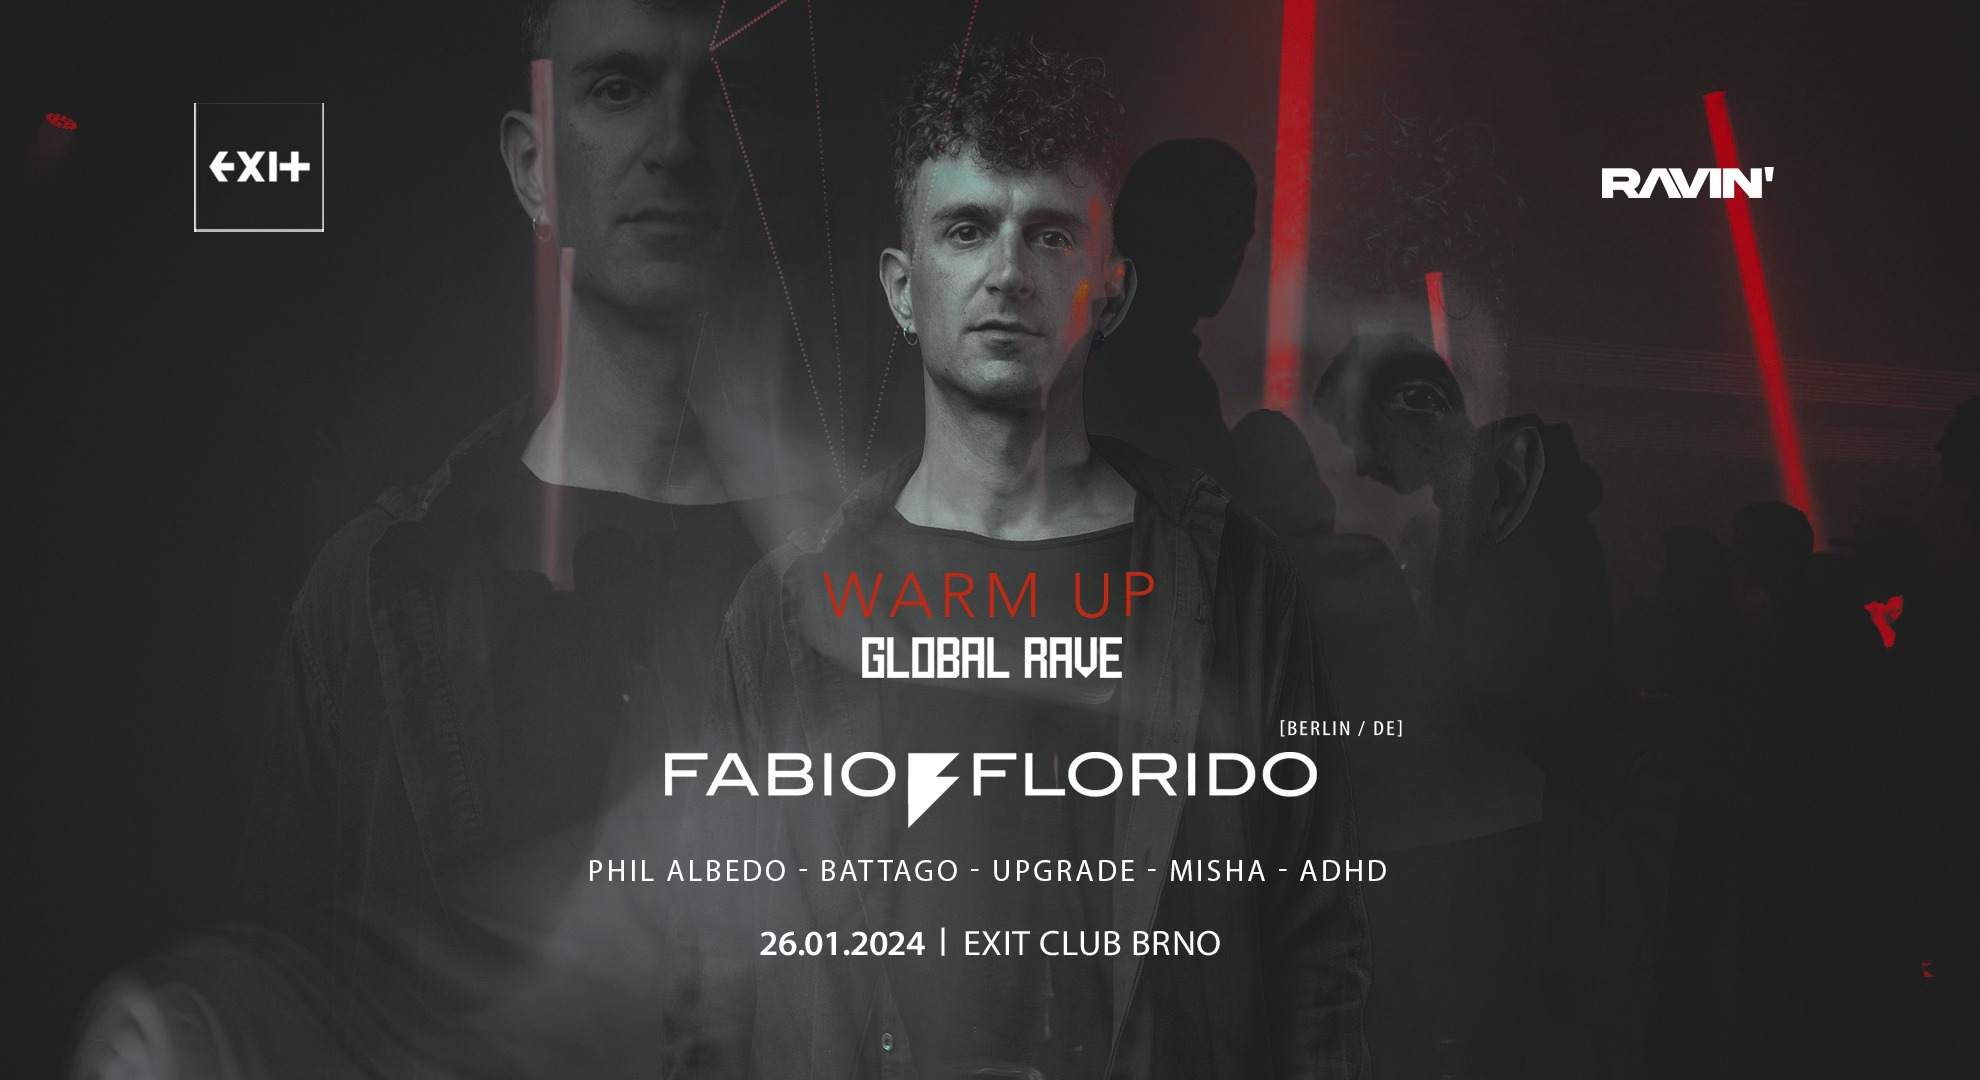 Warm Up - Global Rave with Fabio Florido - フライヤー表